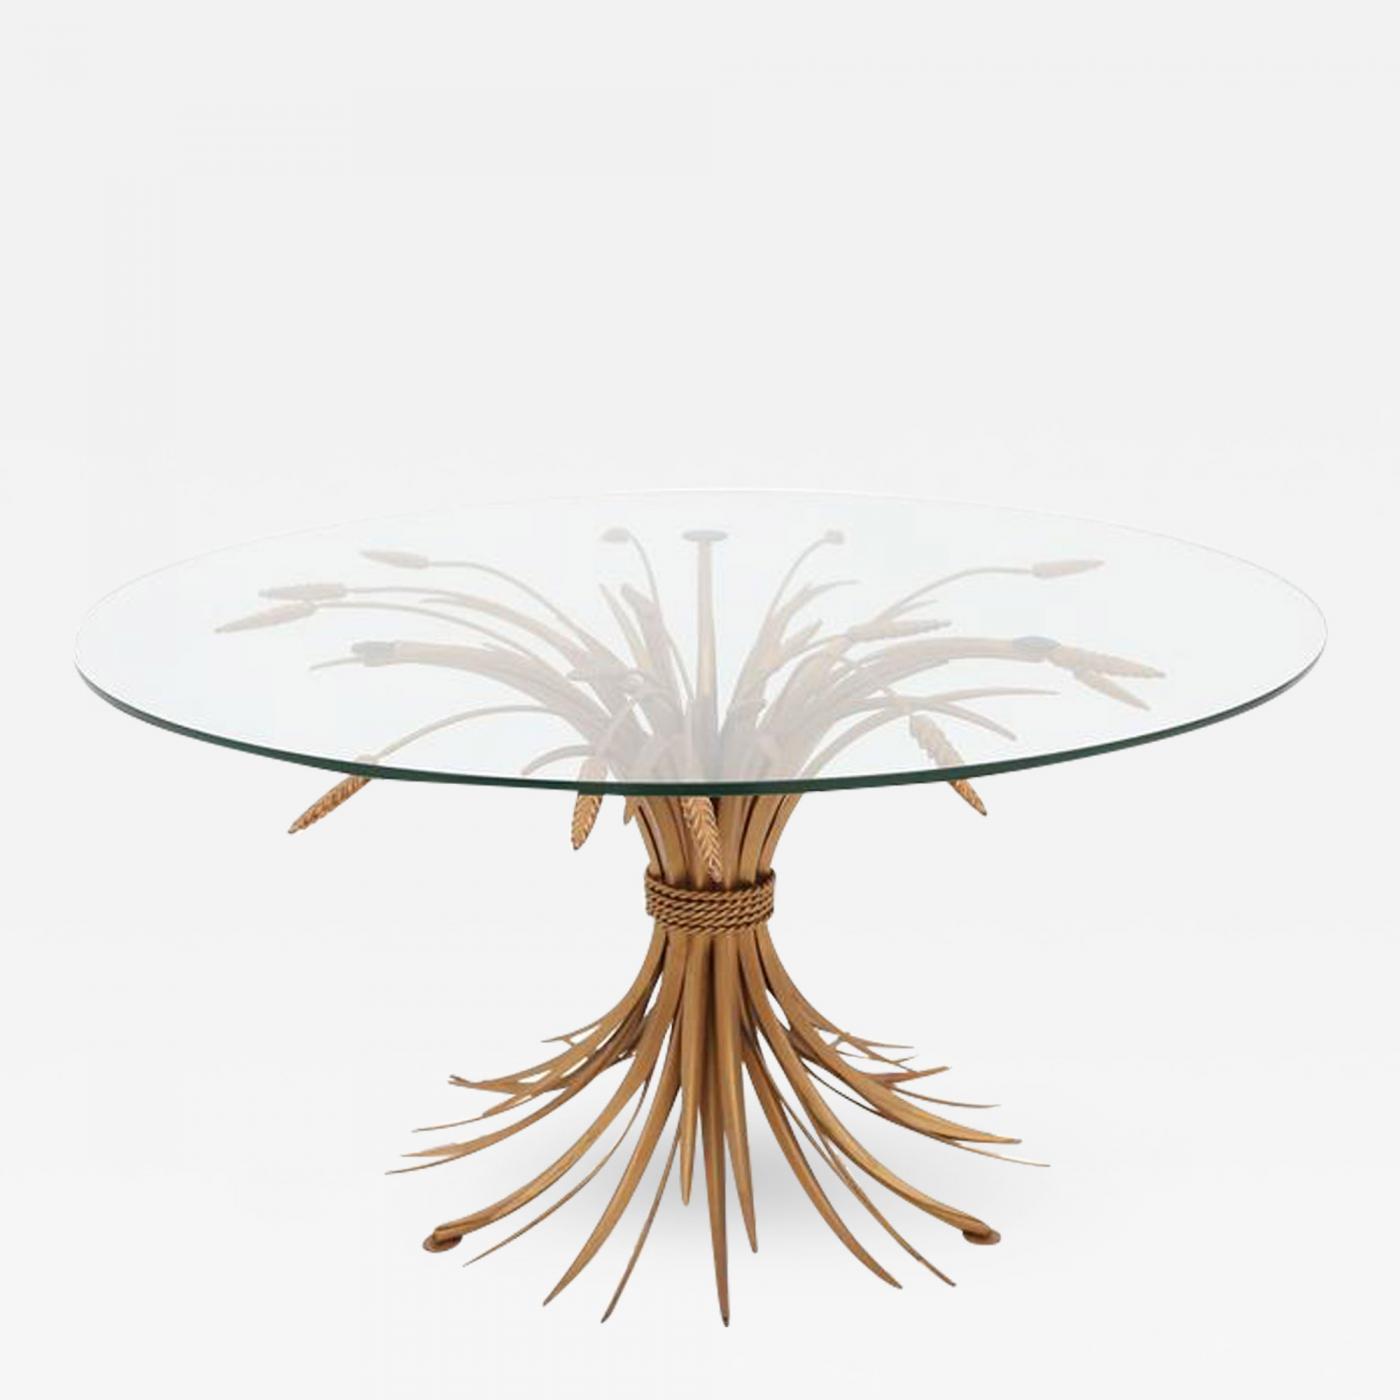 French Art Deco Sheaf of Wheat Table by Coco Chanel